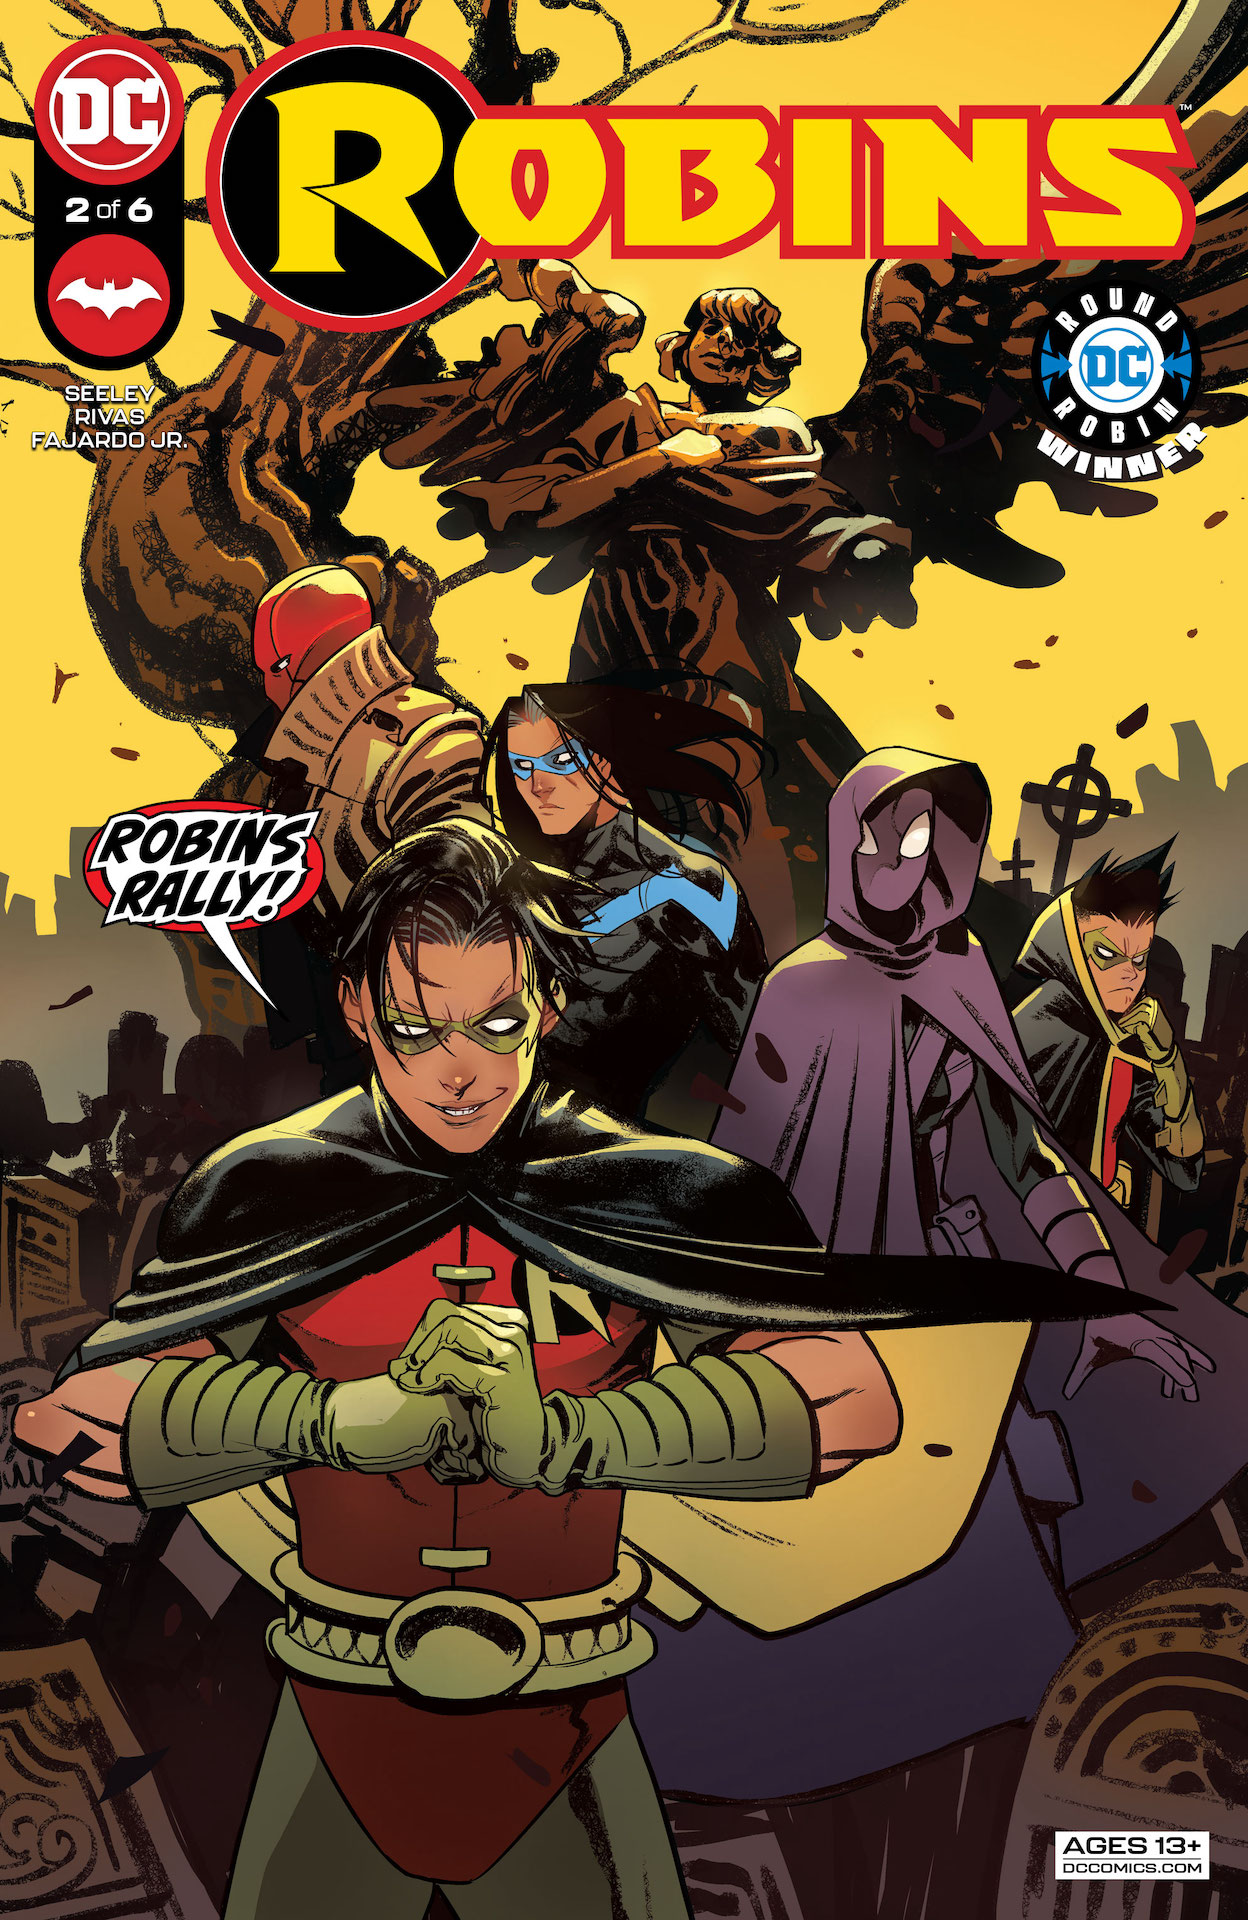 DC Preview: Robins #2